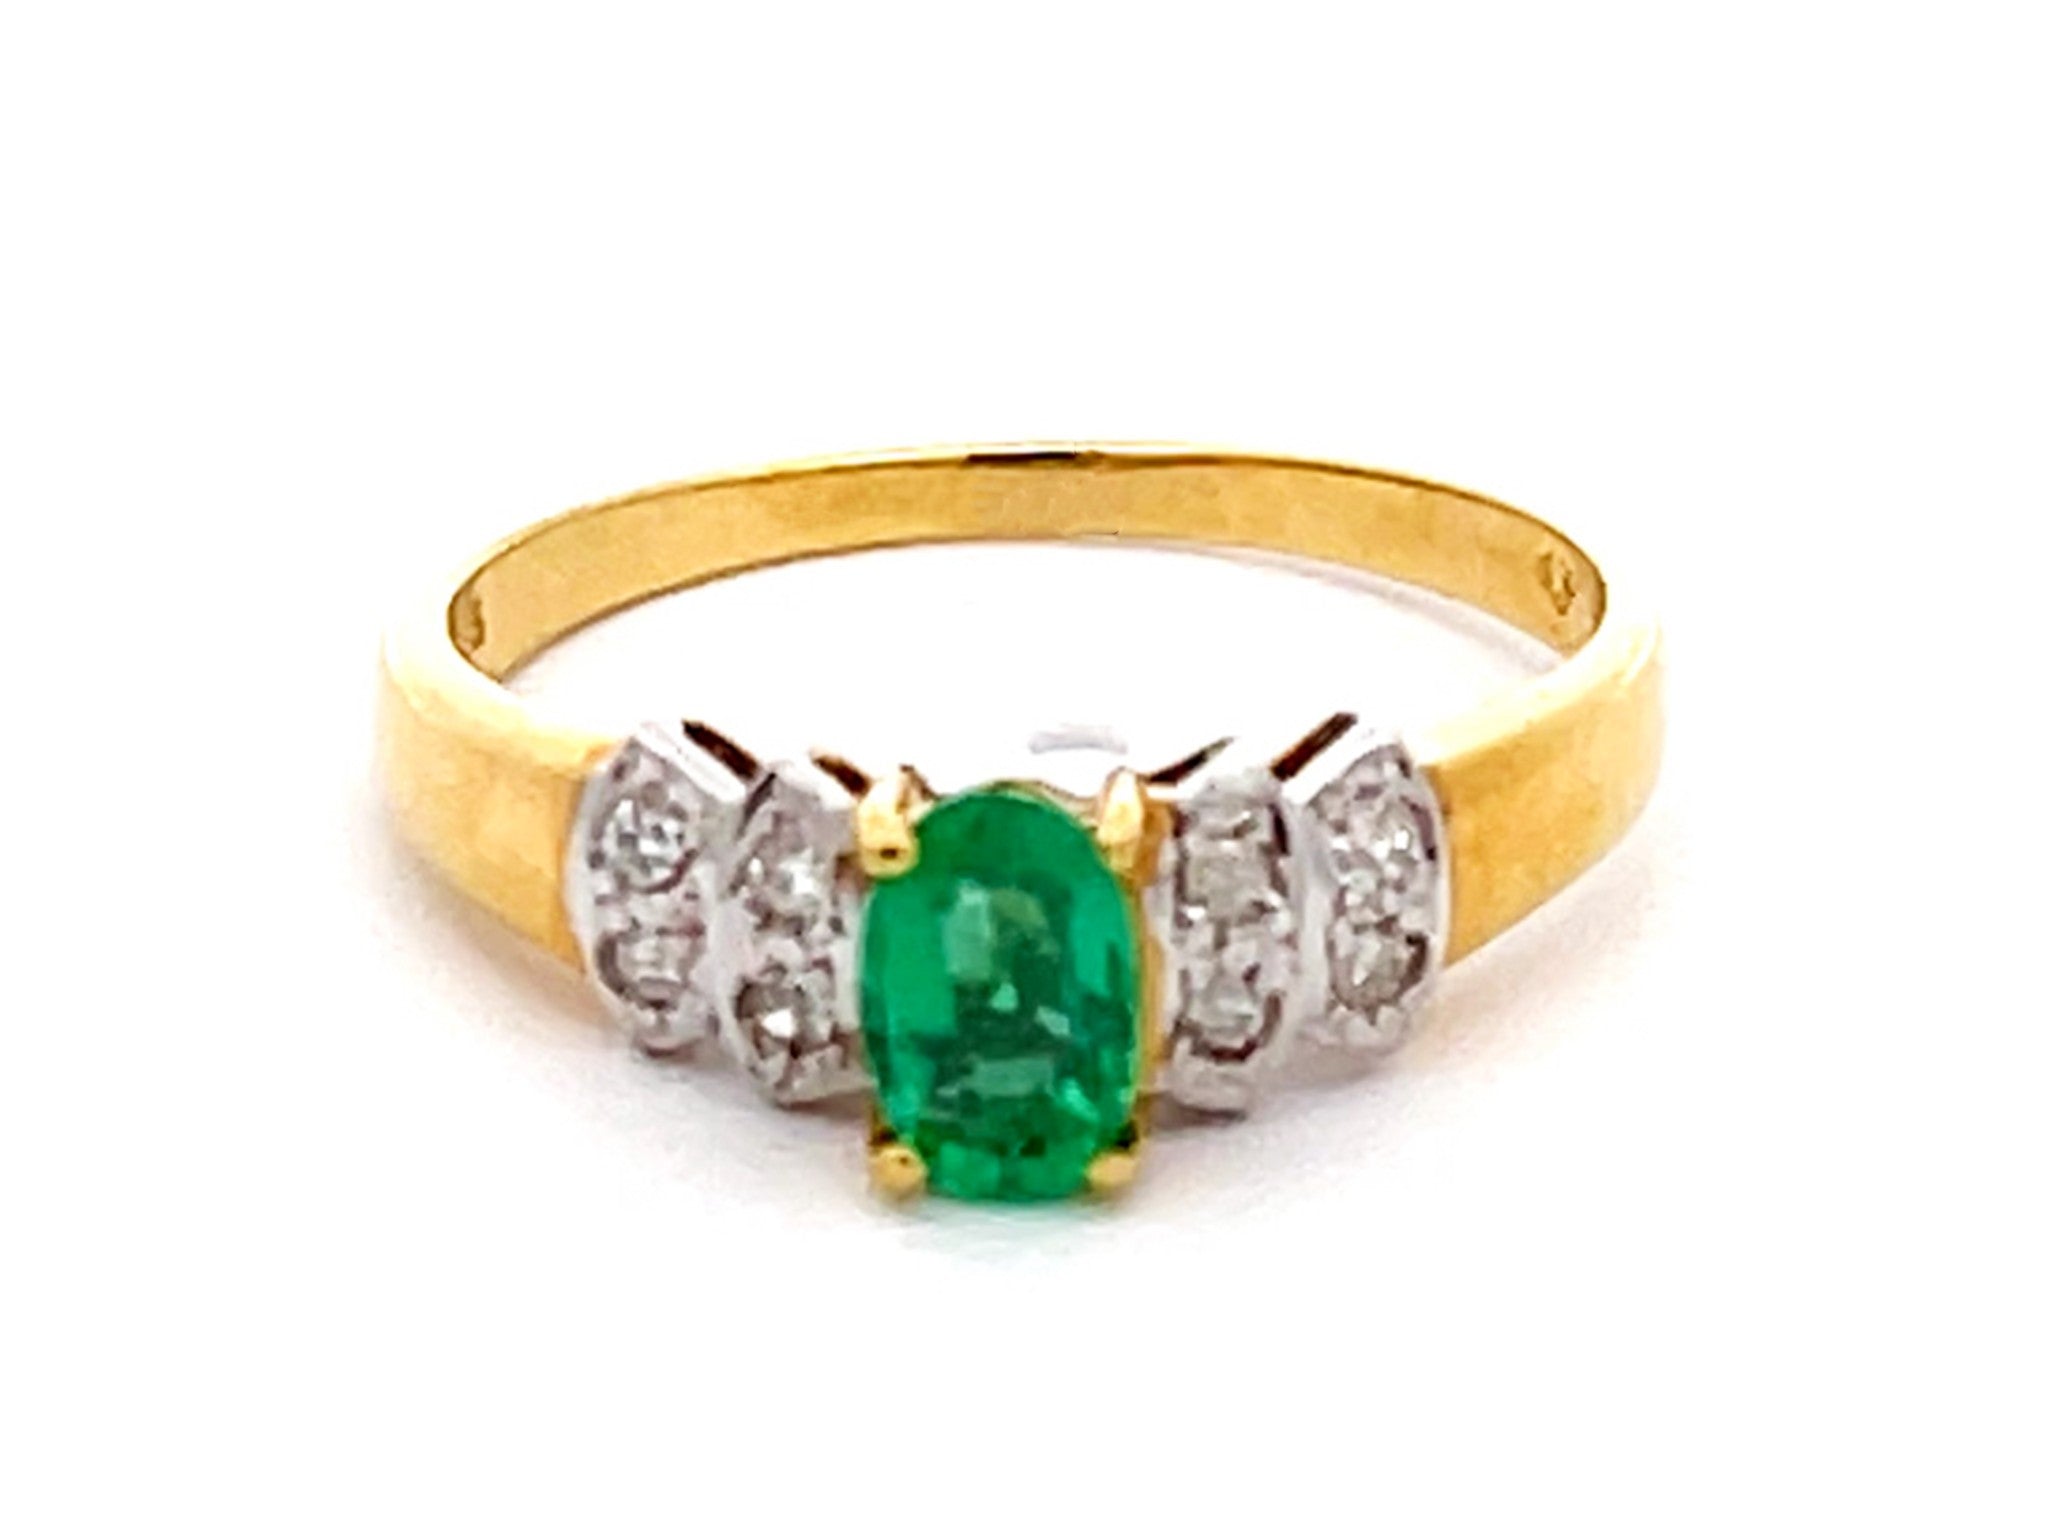 Vintage Green Oval Emerald and Diamond Ring in 14k Yellow Gold